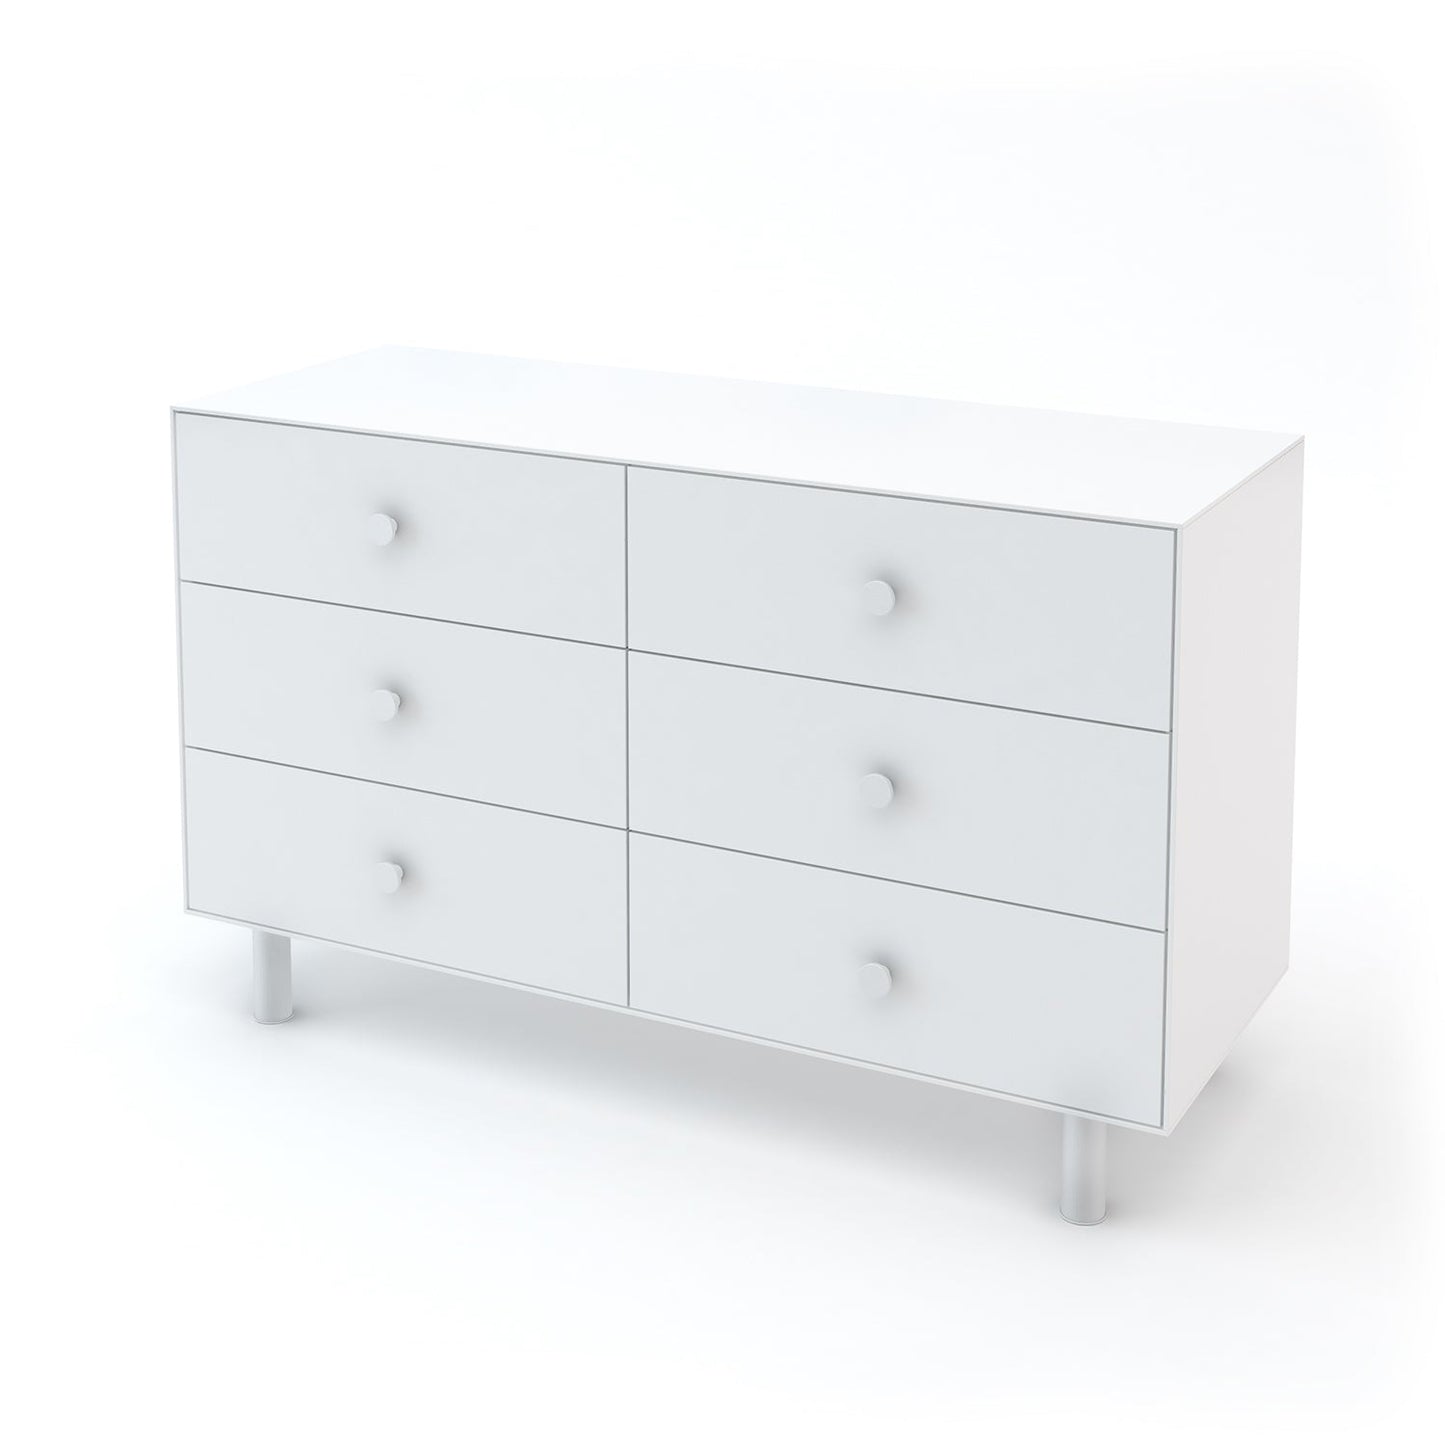 Oeuf NYC Merlin 6 Drawer Dresser - Classic Legs (3 Colours Available)